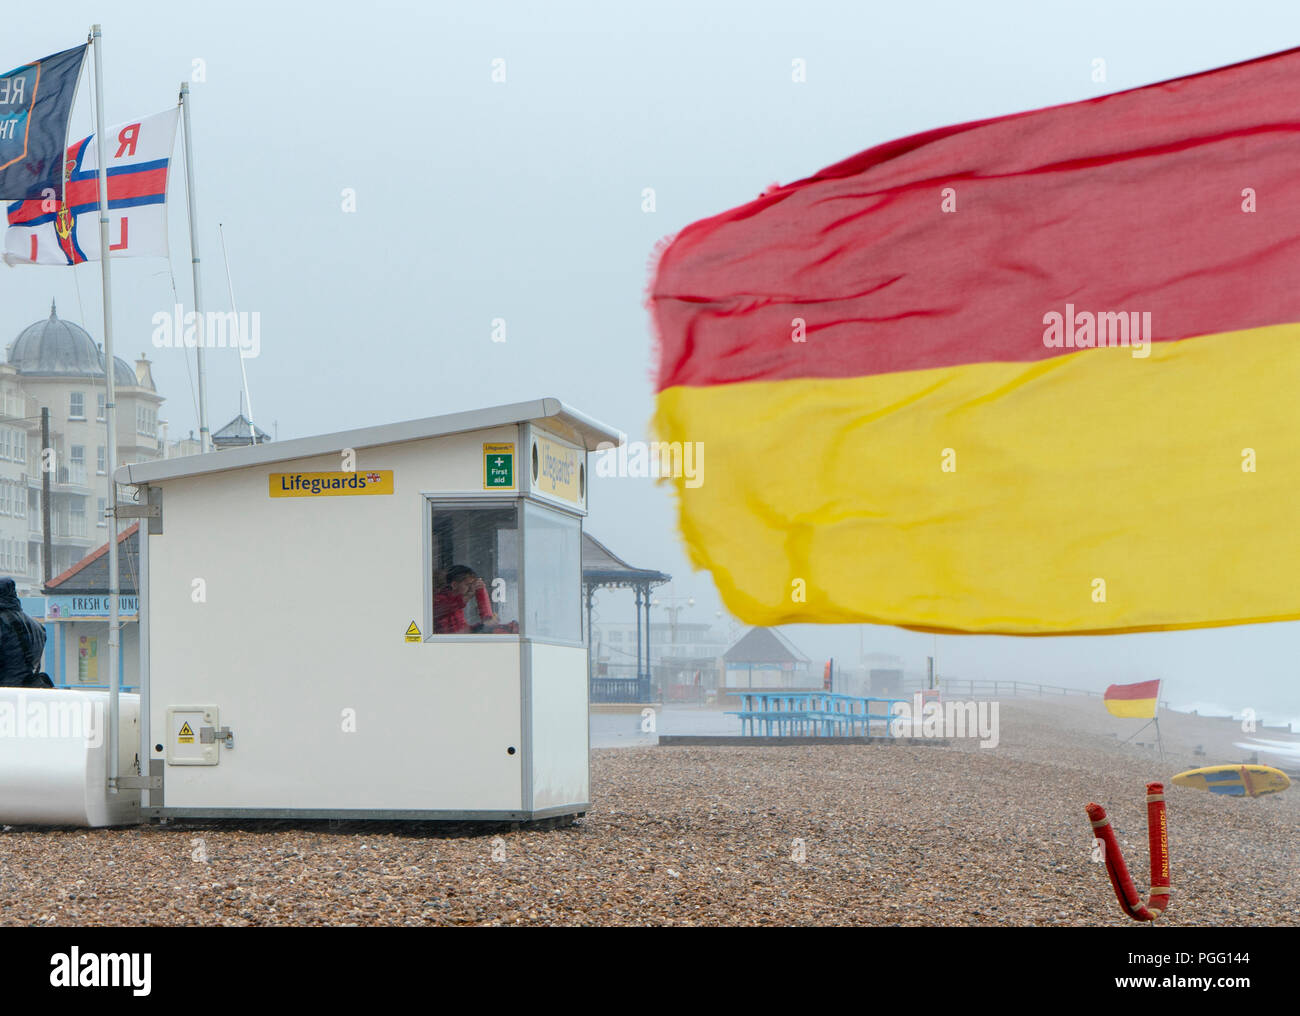 Bognor Regis, UK. 26 August 2018. August Bank Holiday in Bognor Regis a complete washout due to torrential rain, high winds and summer events cancelled. Lifeguards continue to keep a vigilant lookout over a deserted beach and raging sea. Credit: Sarnia/Alamy Live News Stock Photo